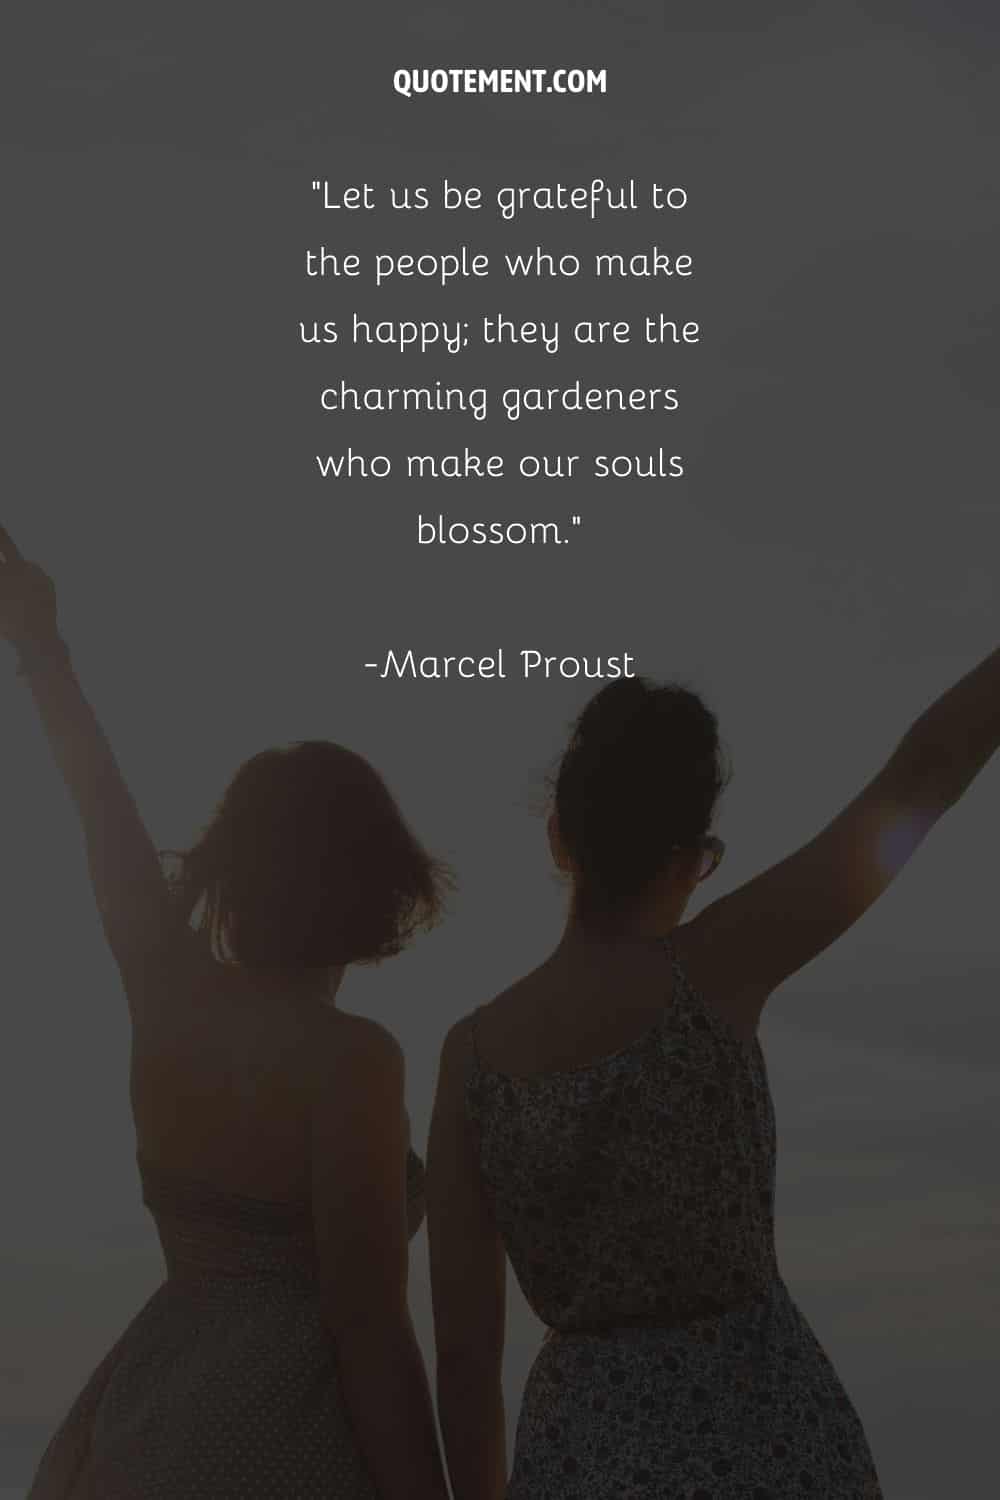 Two girls standing together representing a friend quote by Marcel Proust.
